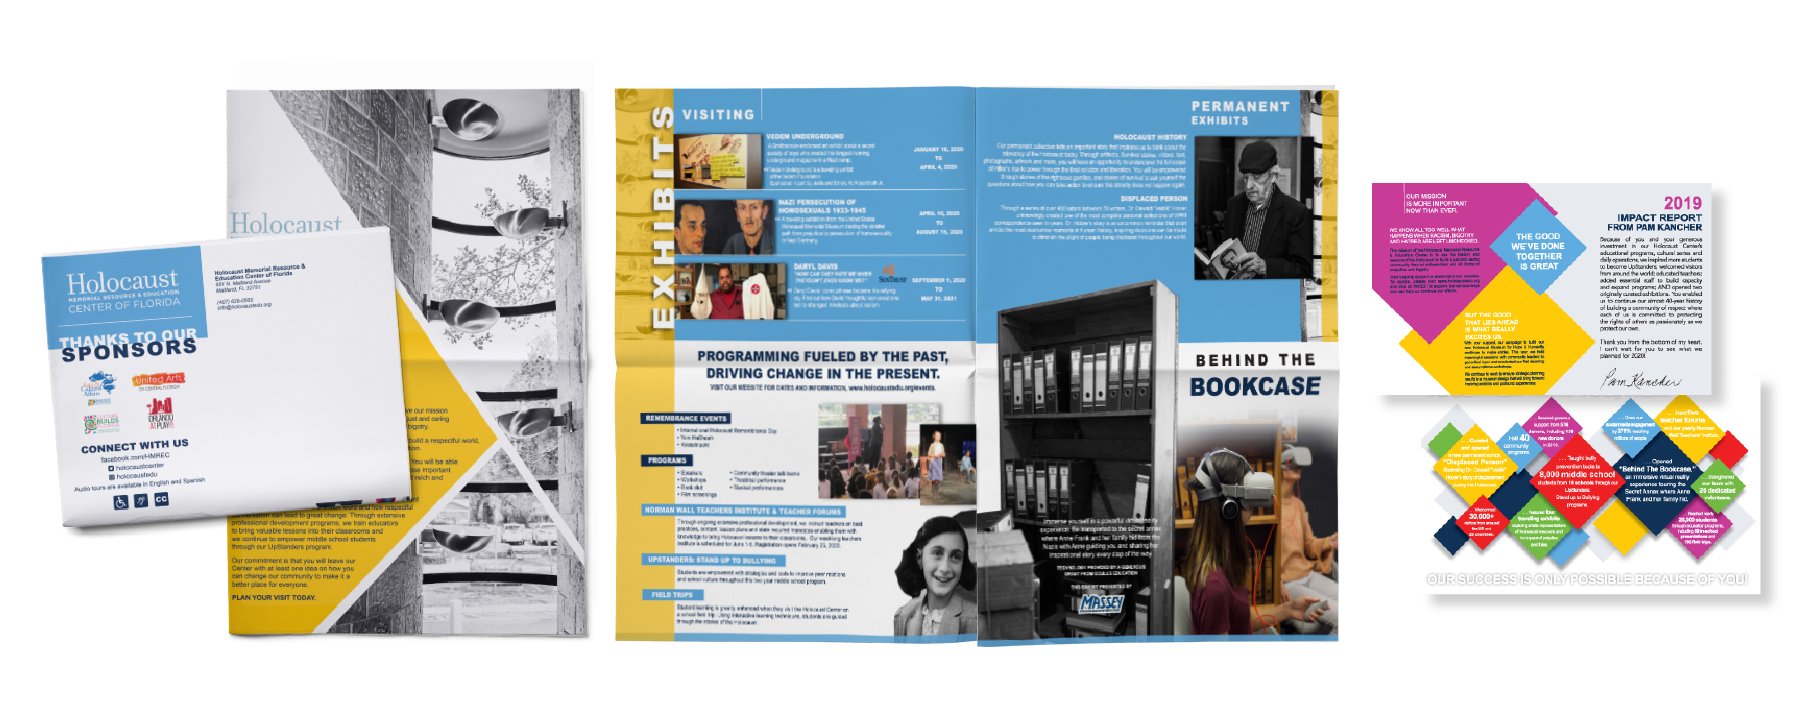 Holocaust Memorial Resource & Education Center brochures featuring Anne Frank